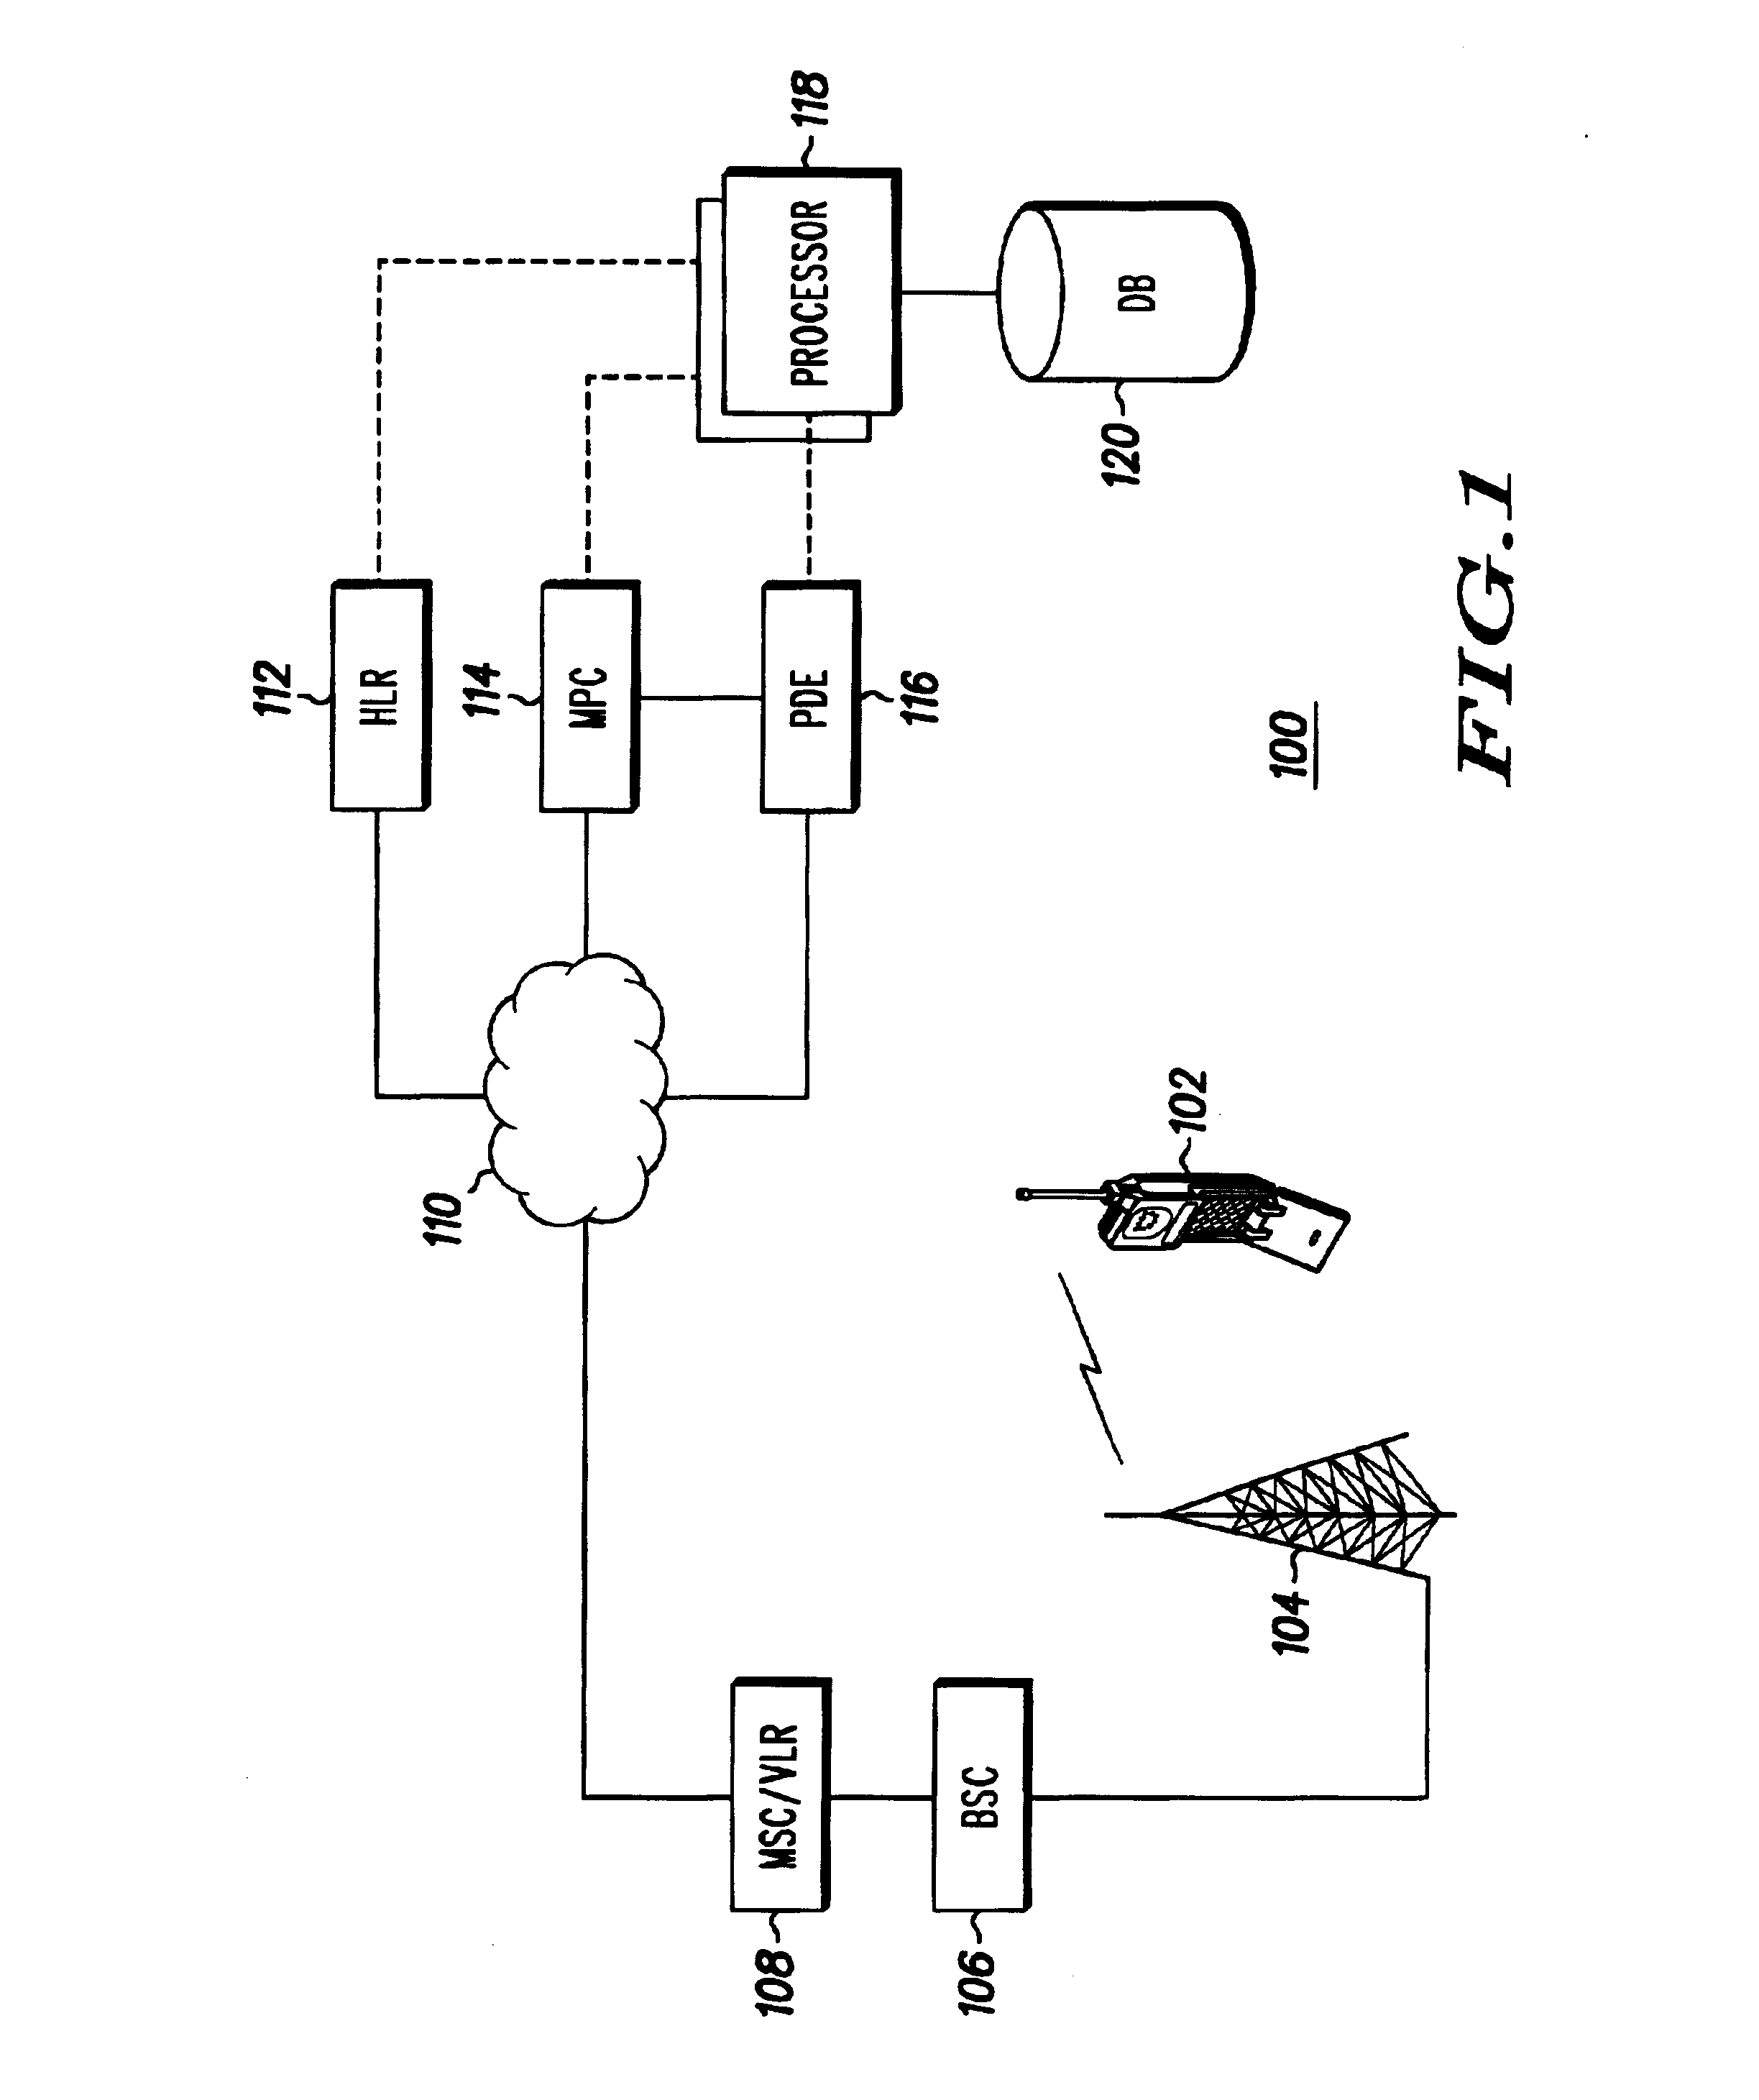 Network and method for monitoring location capabilities of a mobile station